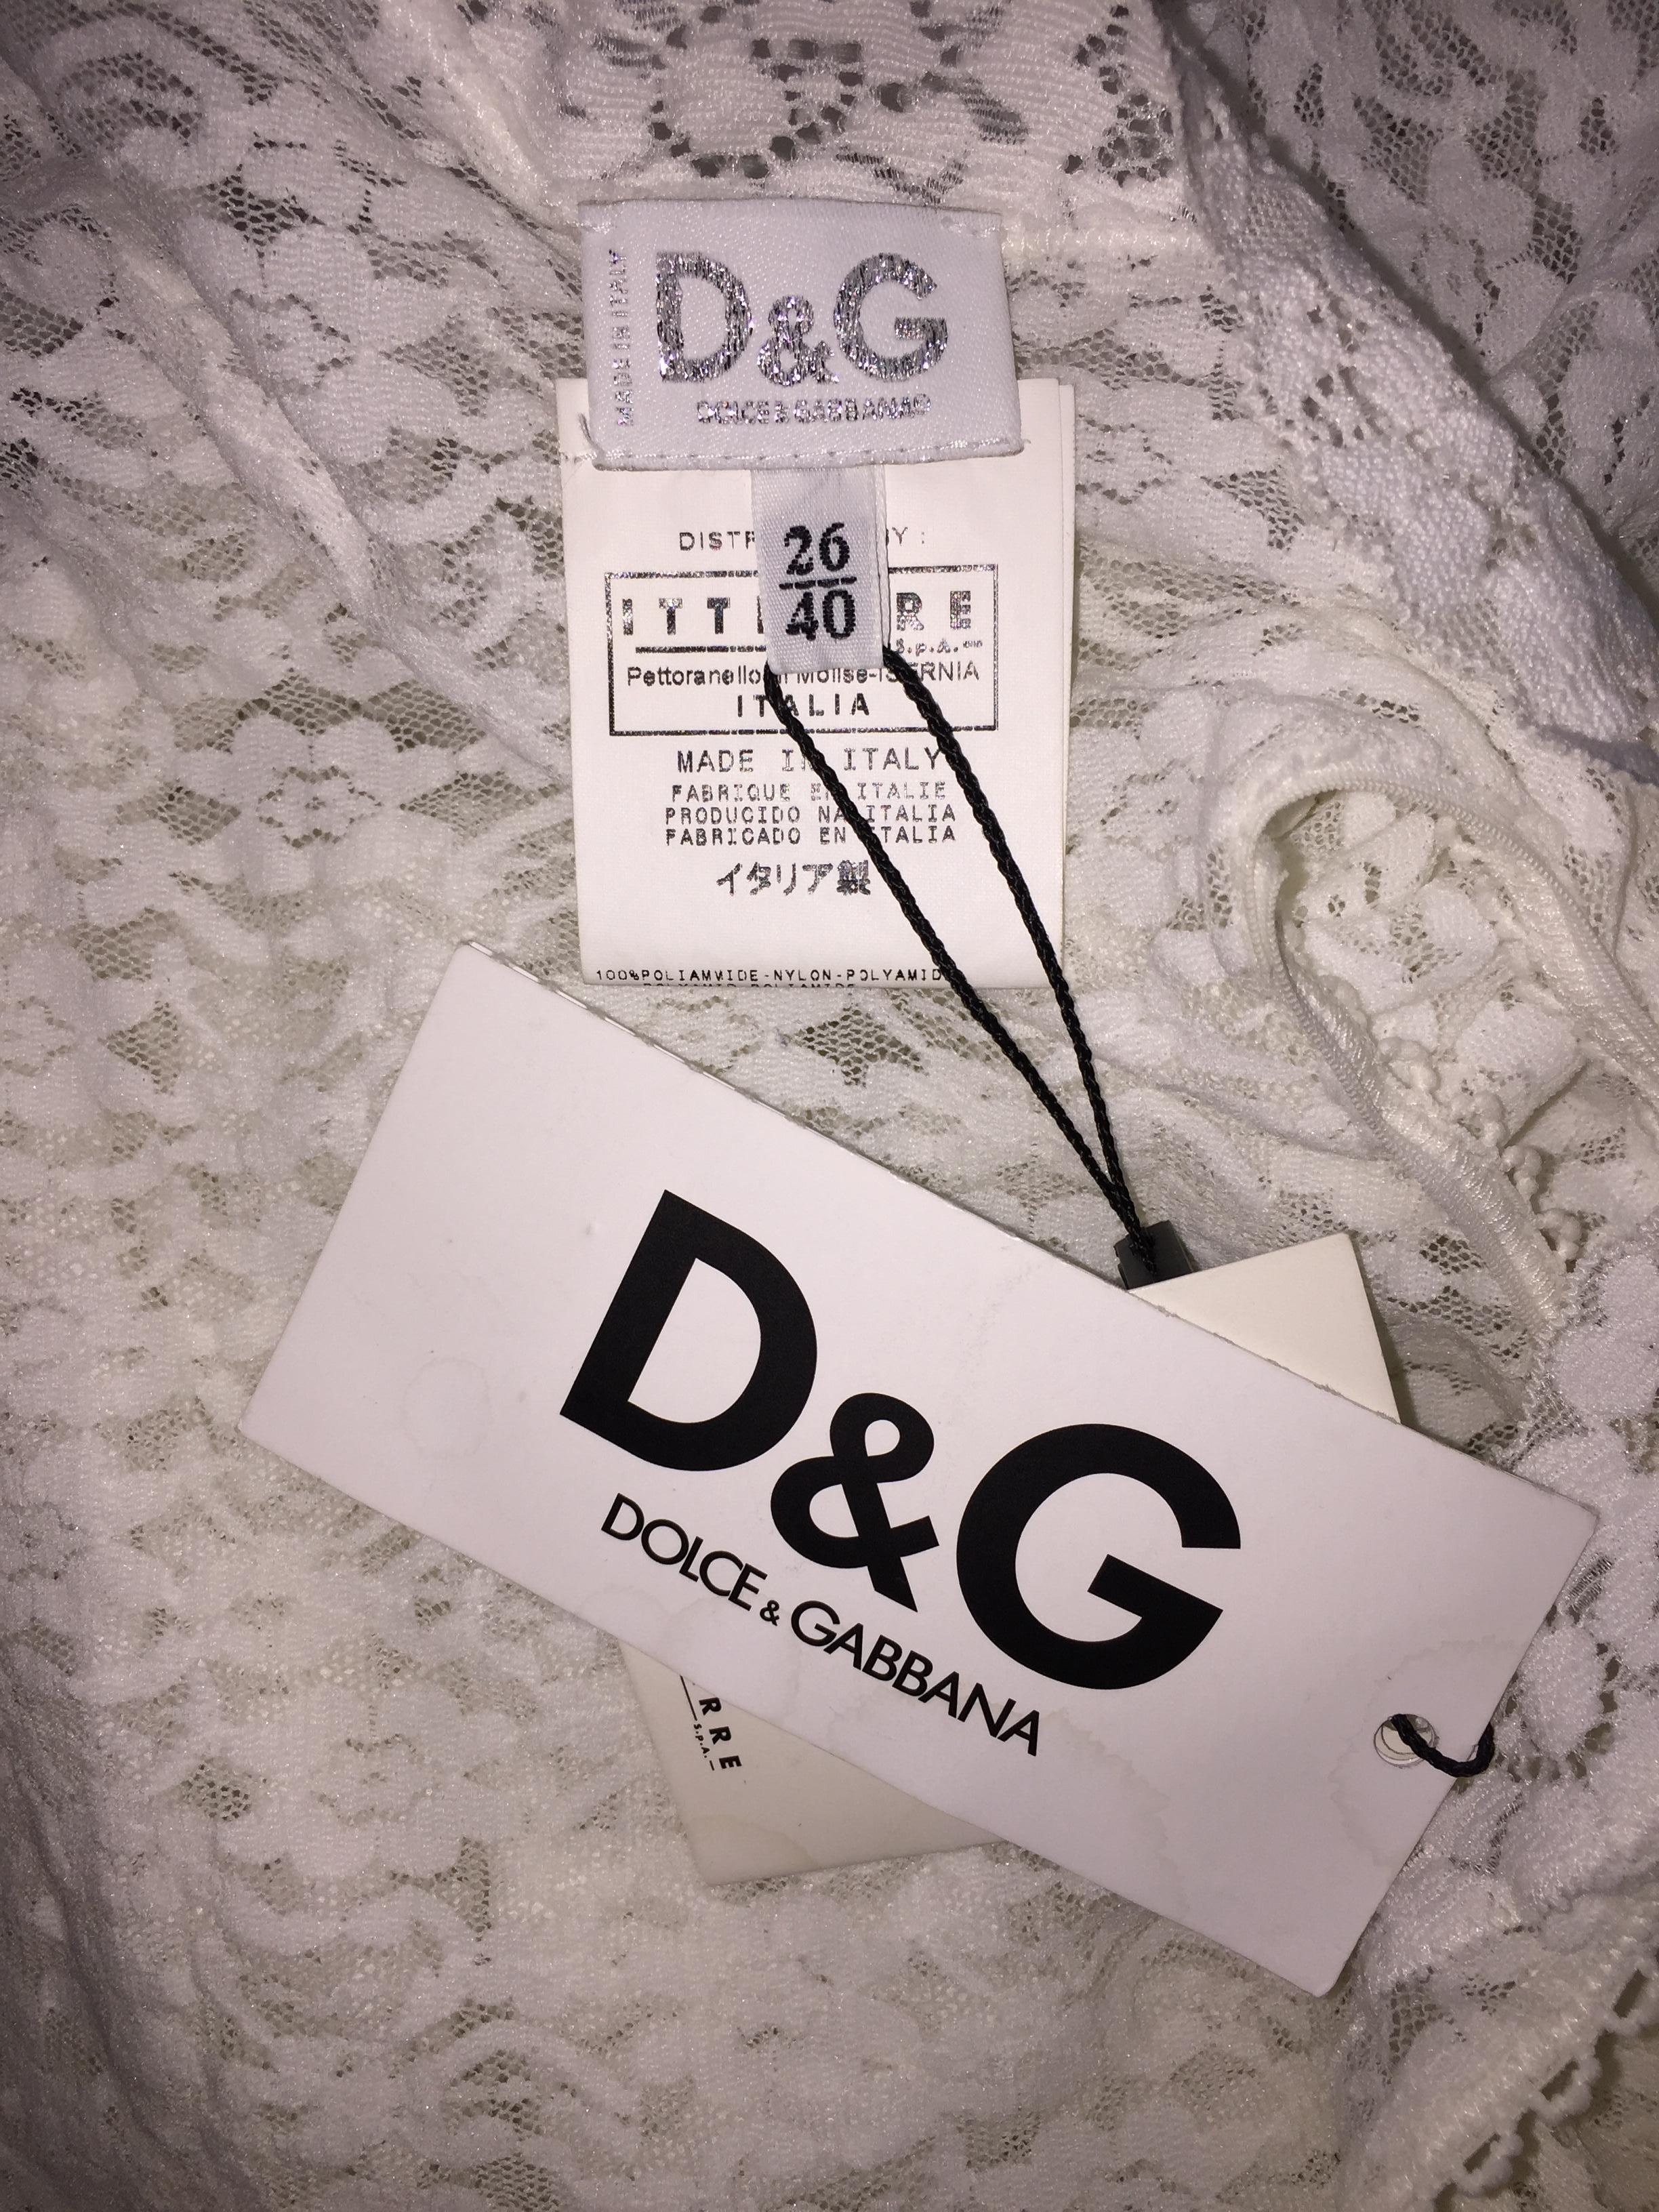 Gray S/S 2006 NWT D&G by Dolce & Gabbana Runway Sheer White Lace Wiggle Dress